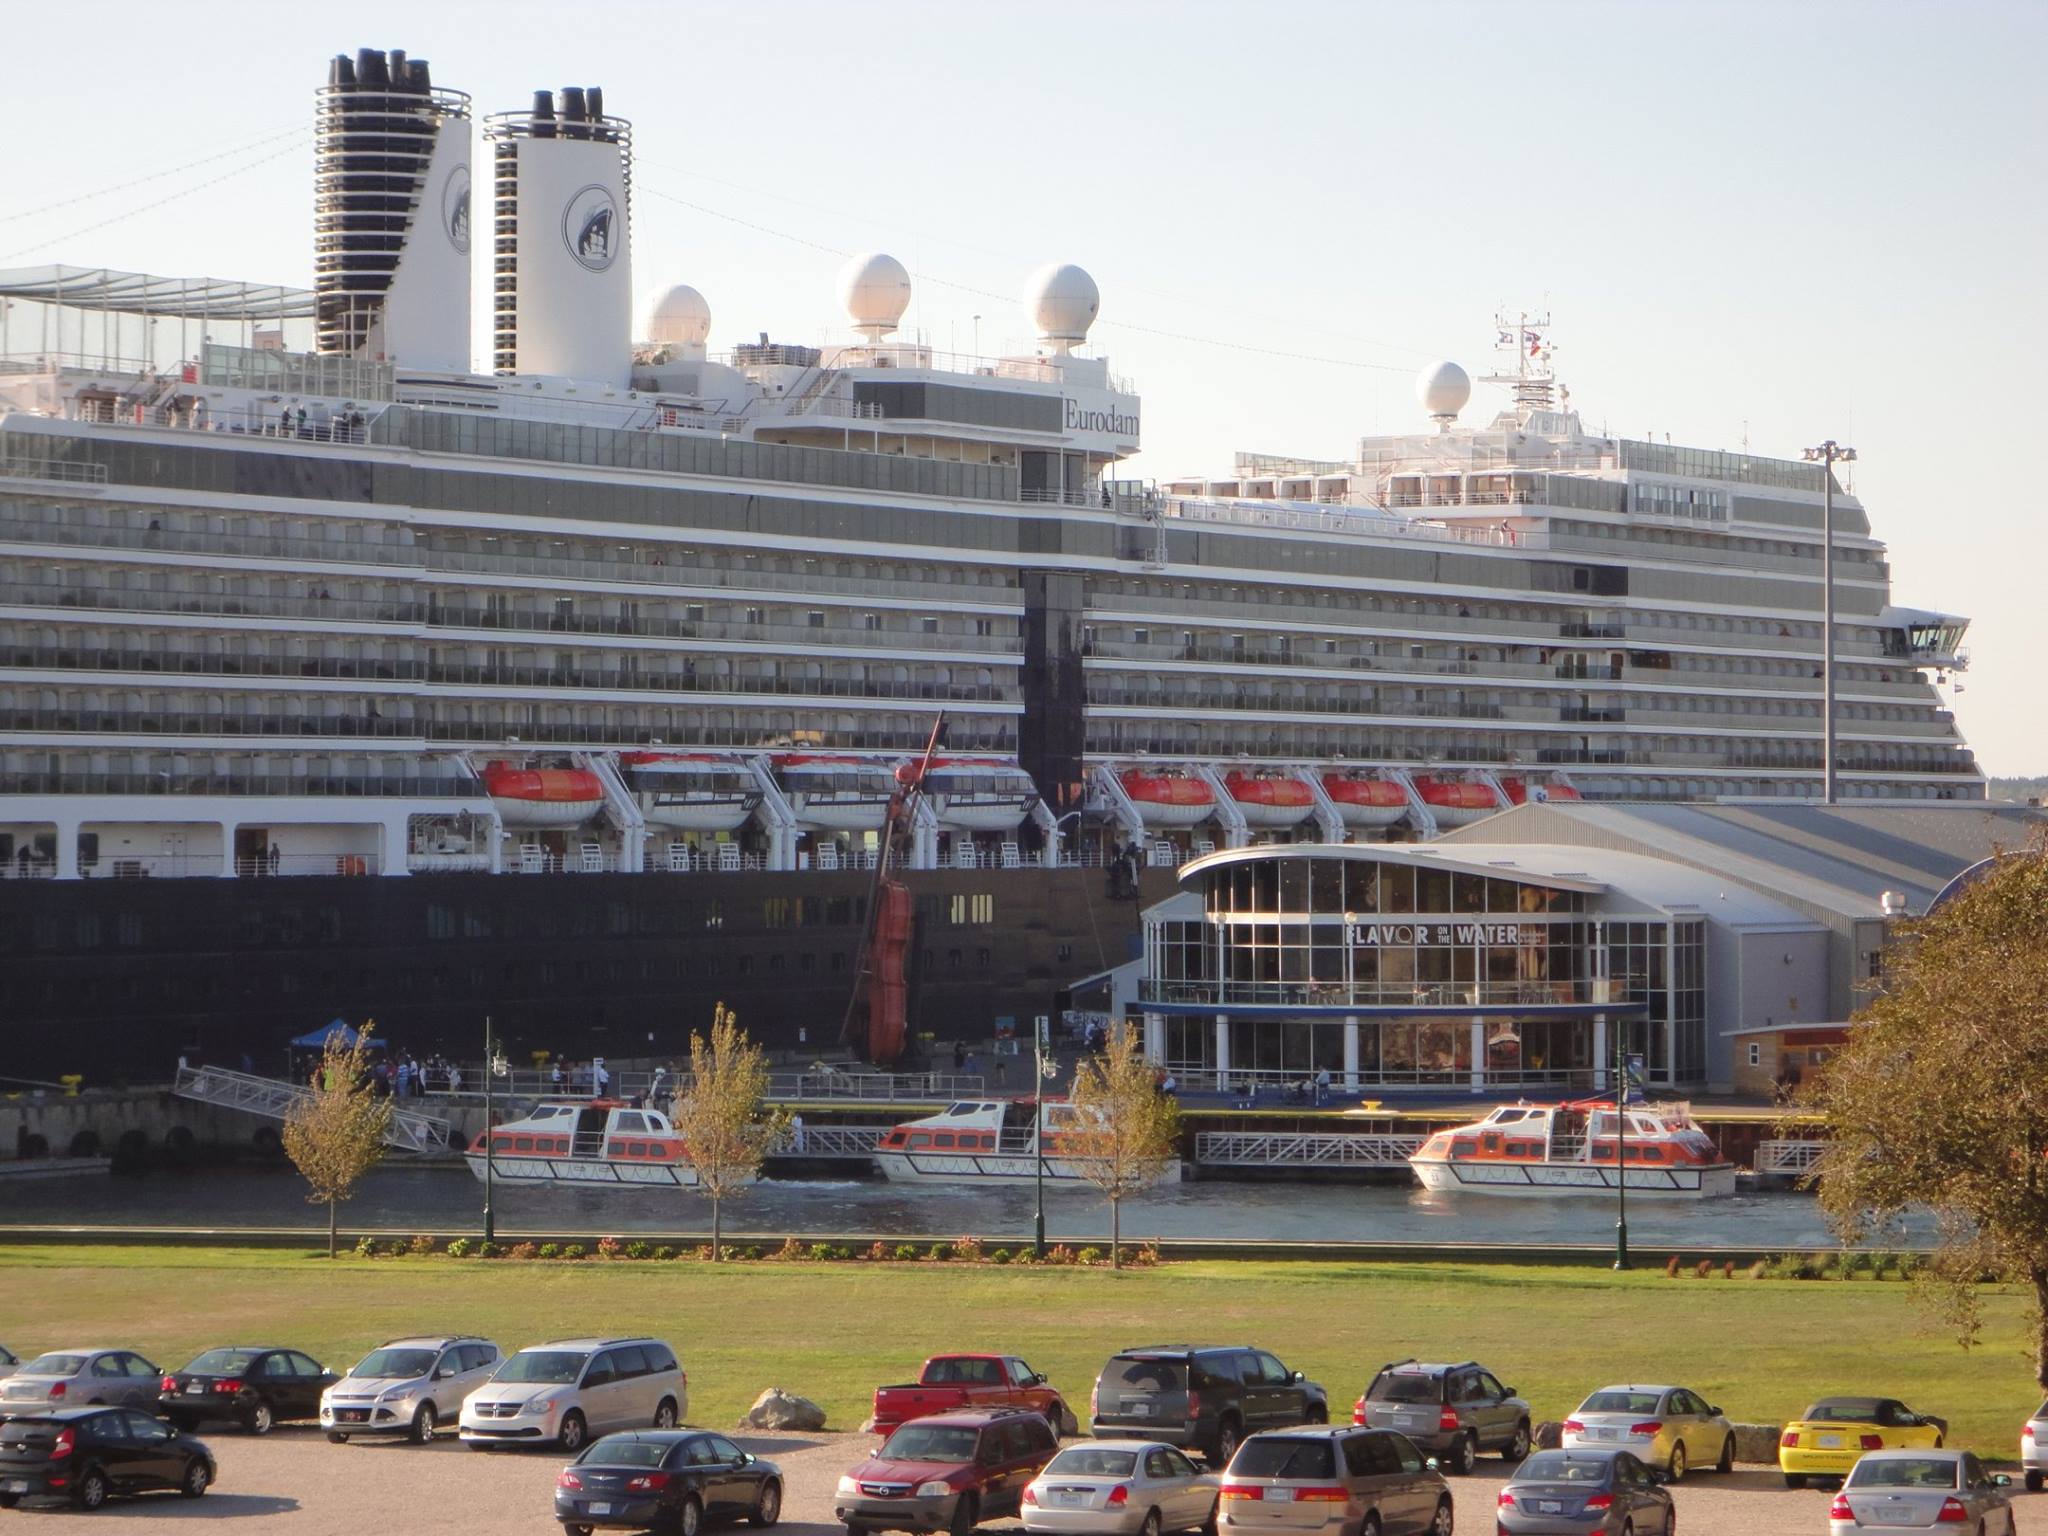 Here is another View of the Cruise Ship Parked by the Big Fiddle the Biggest Fiddle in the World.